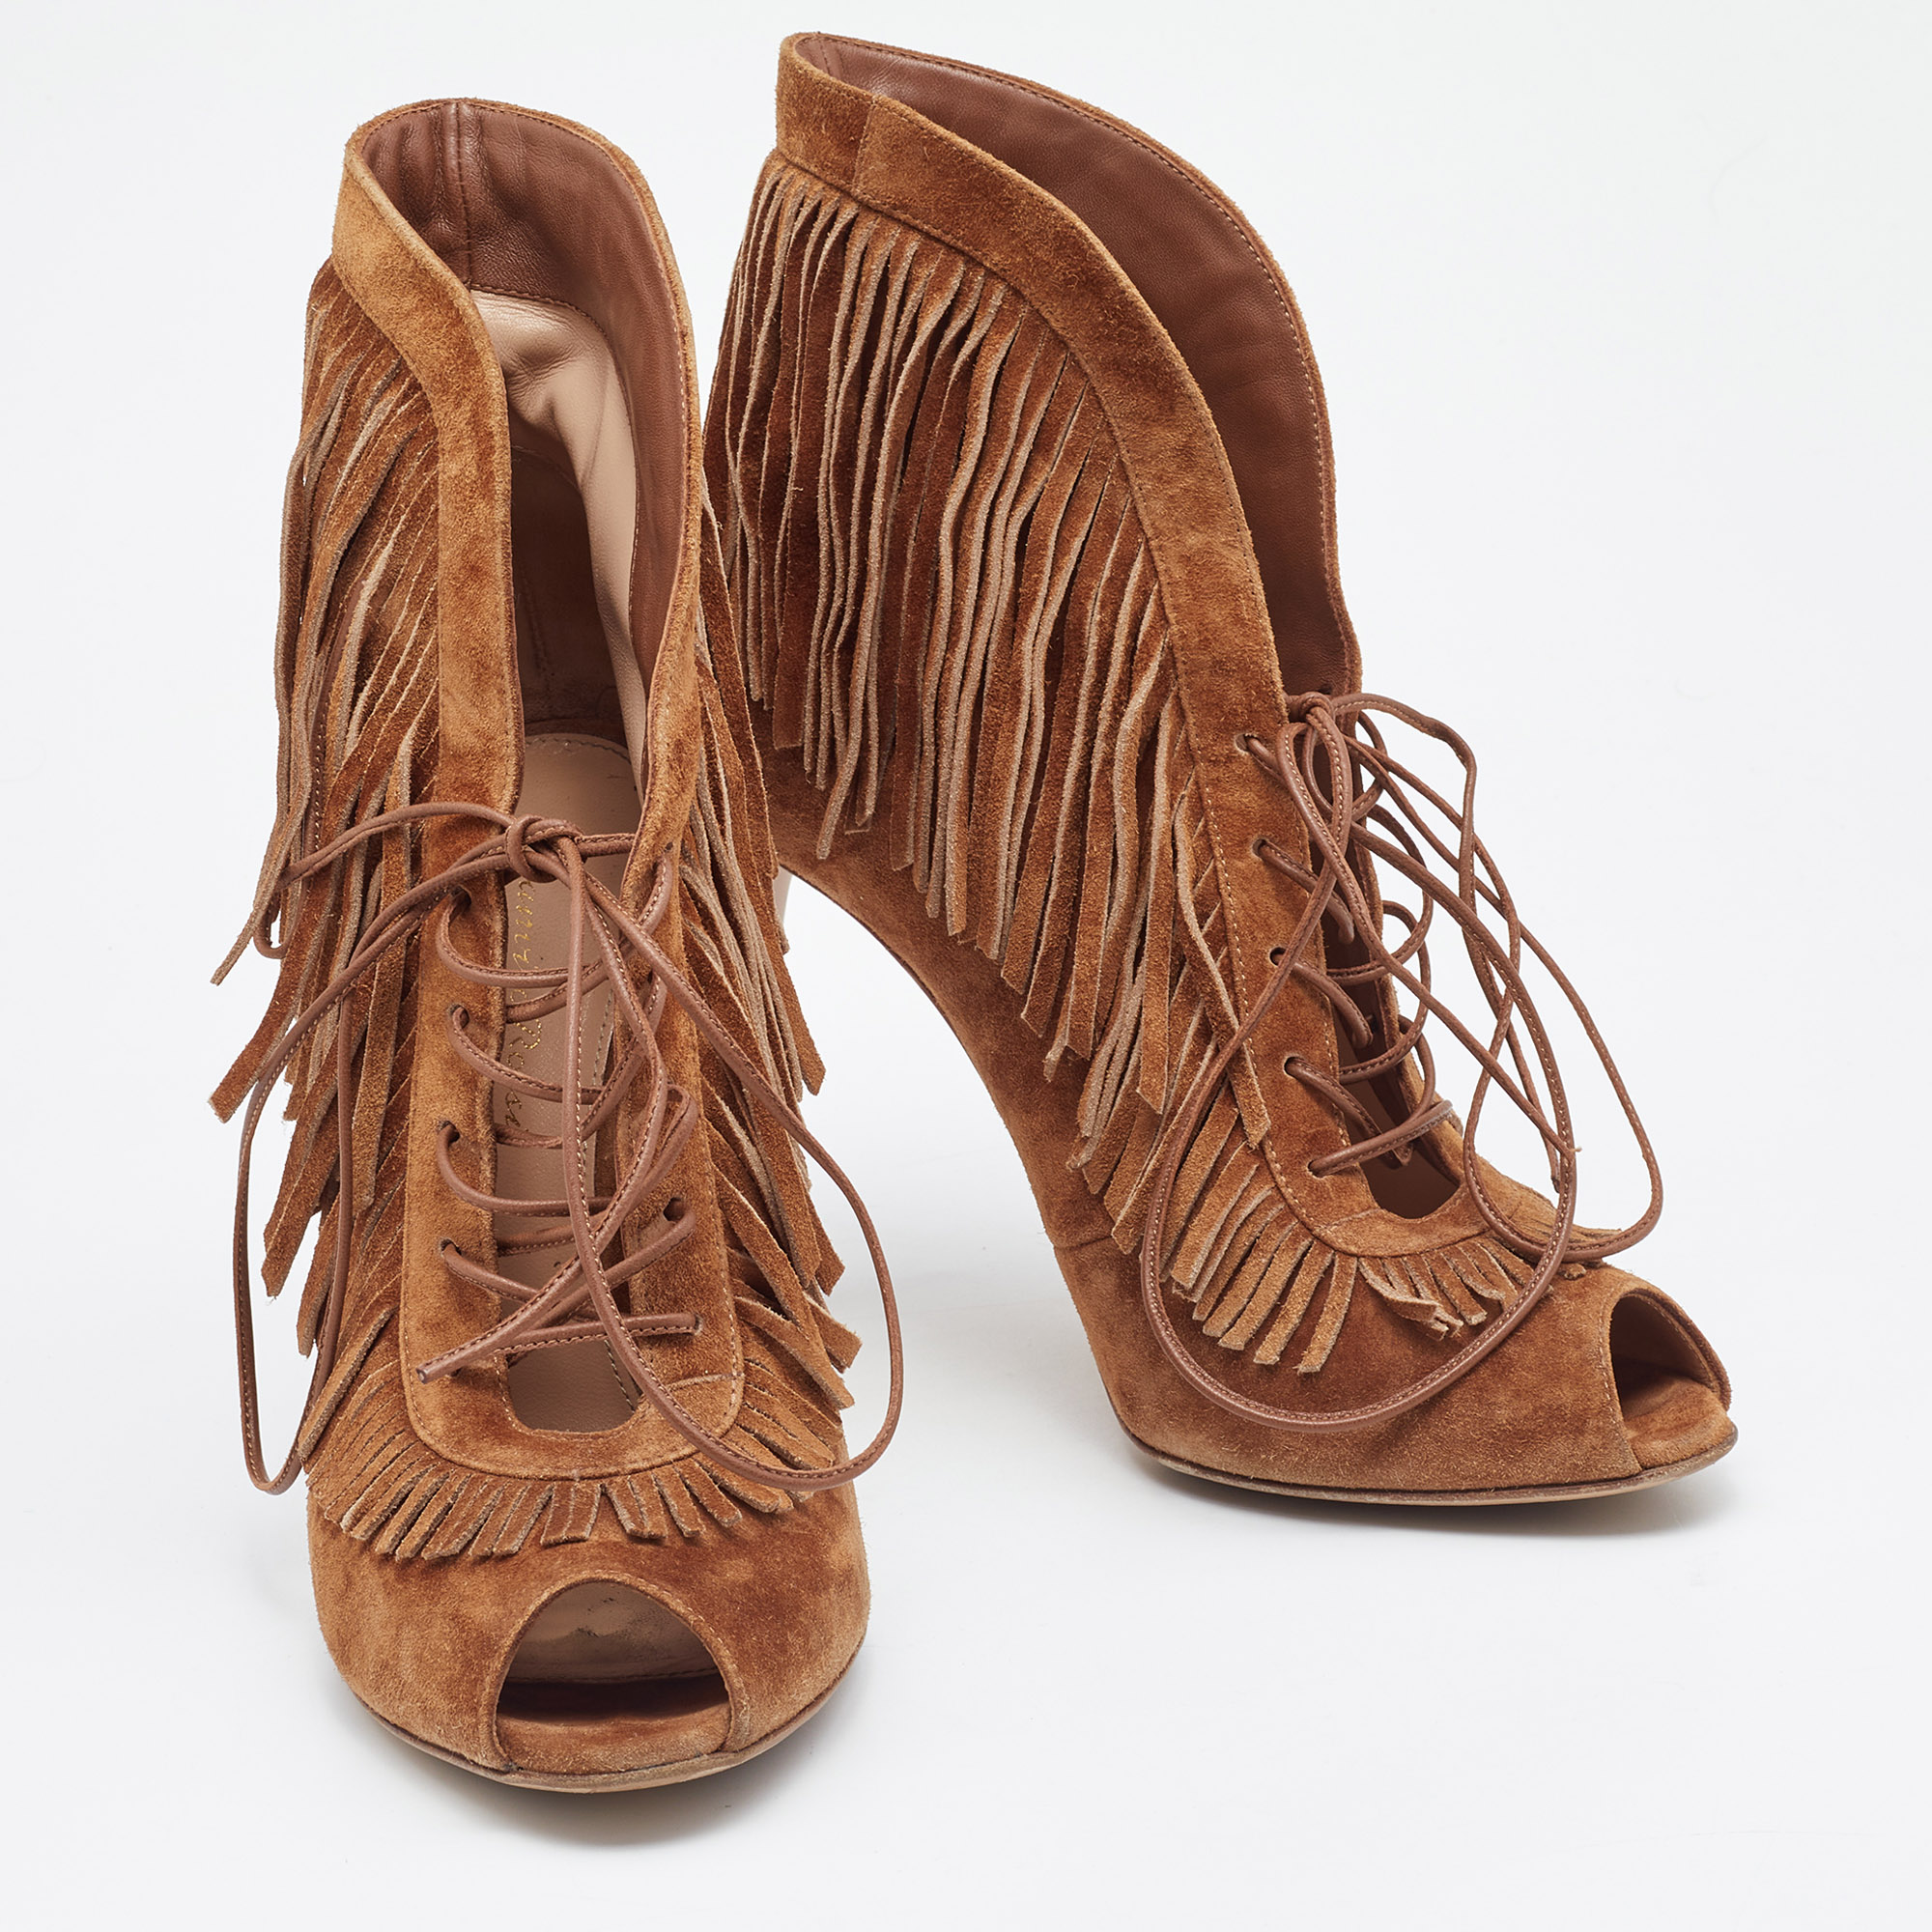 Gianvito Rossi Tan Suede Fringe Lace Up Ankle Booties Size 39